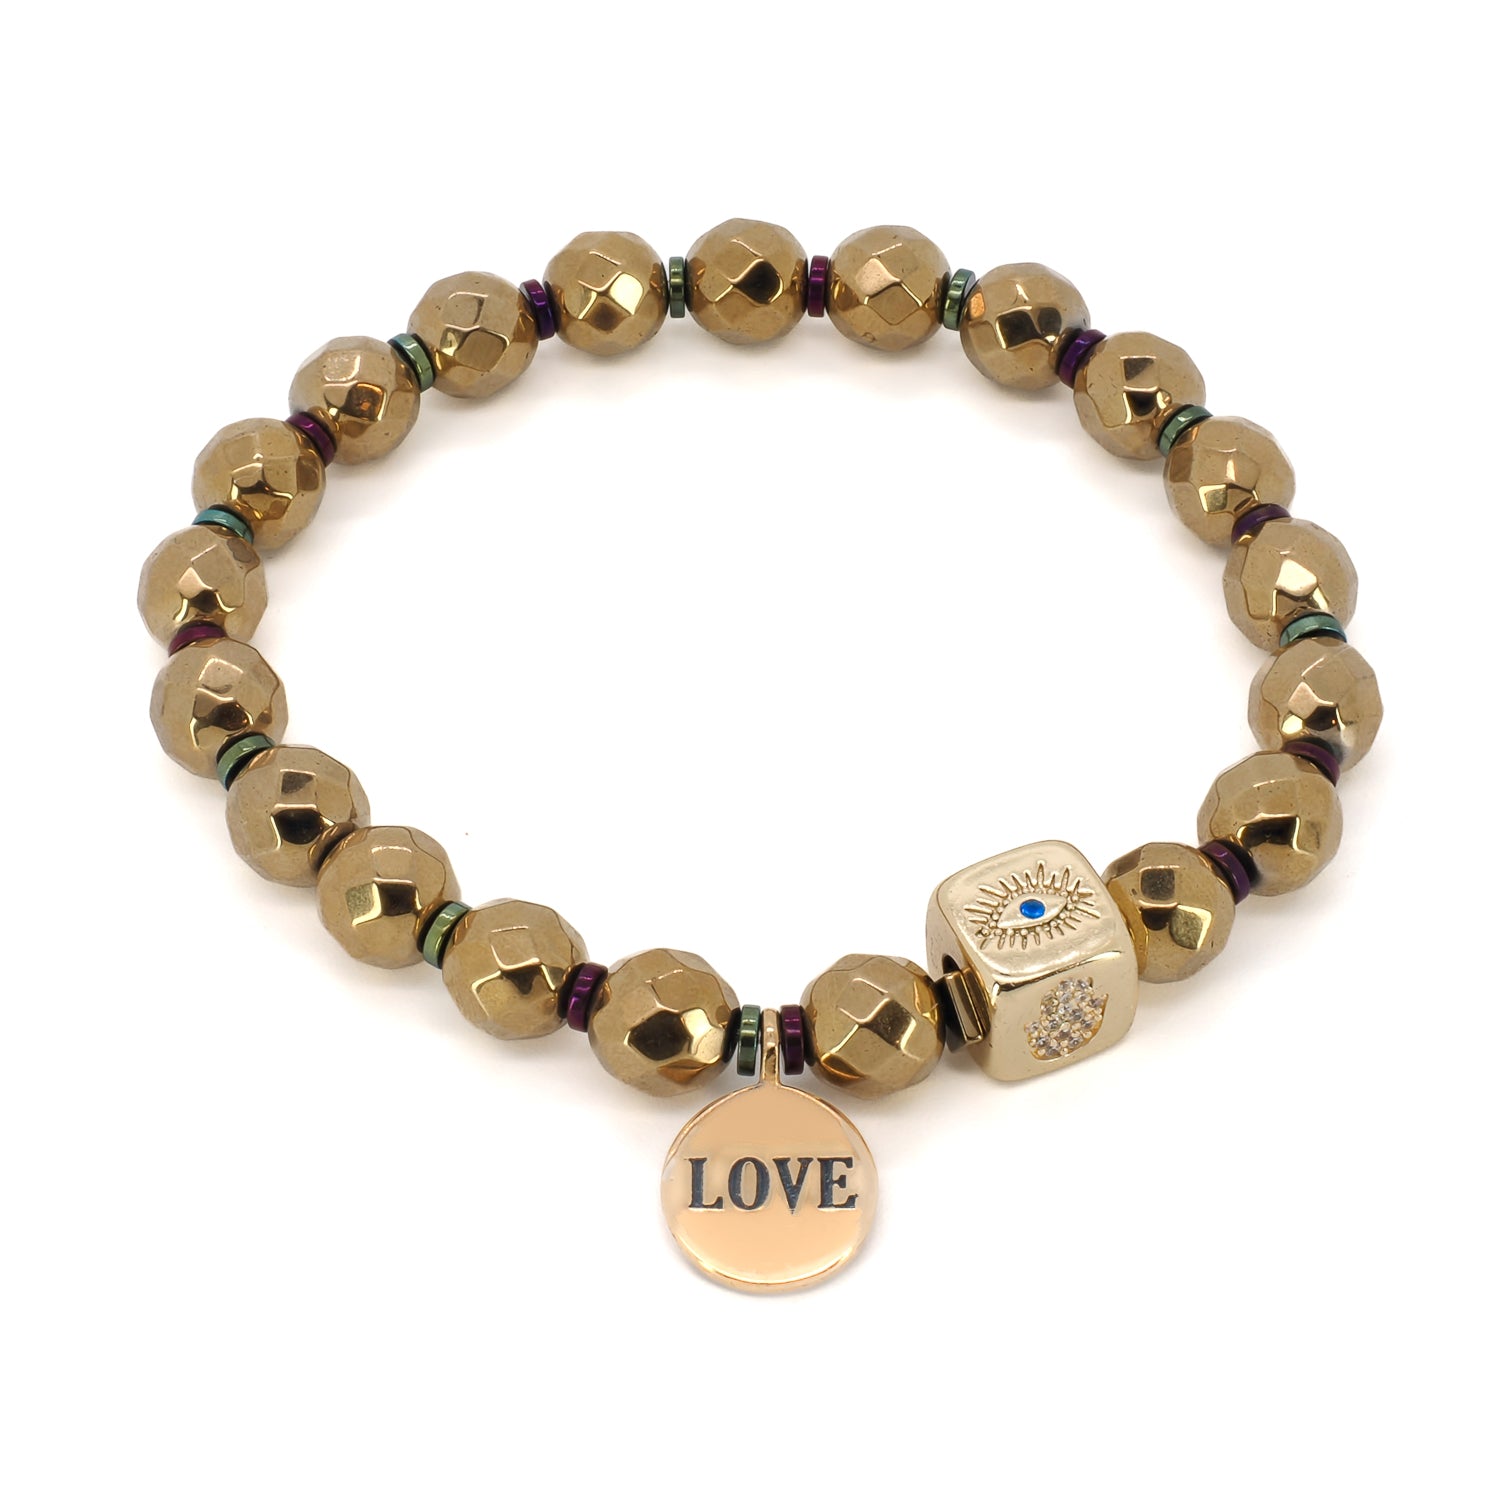 Embrace the spiritual protection with the Love Symbol Bracelet, adorned with a gold Evil Eye and Hamsa accent bead and natural hematite gemstones.